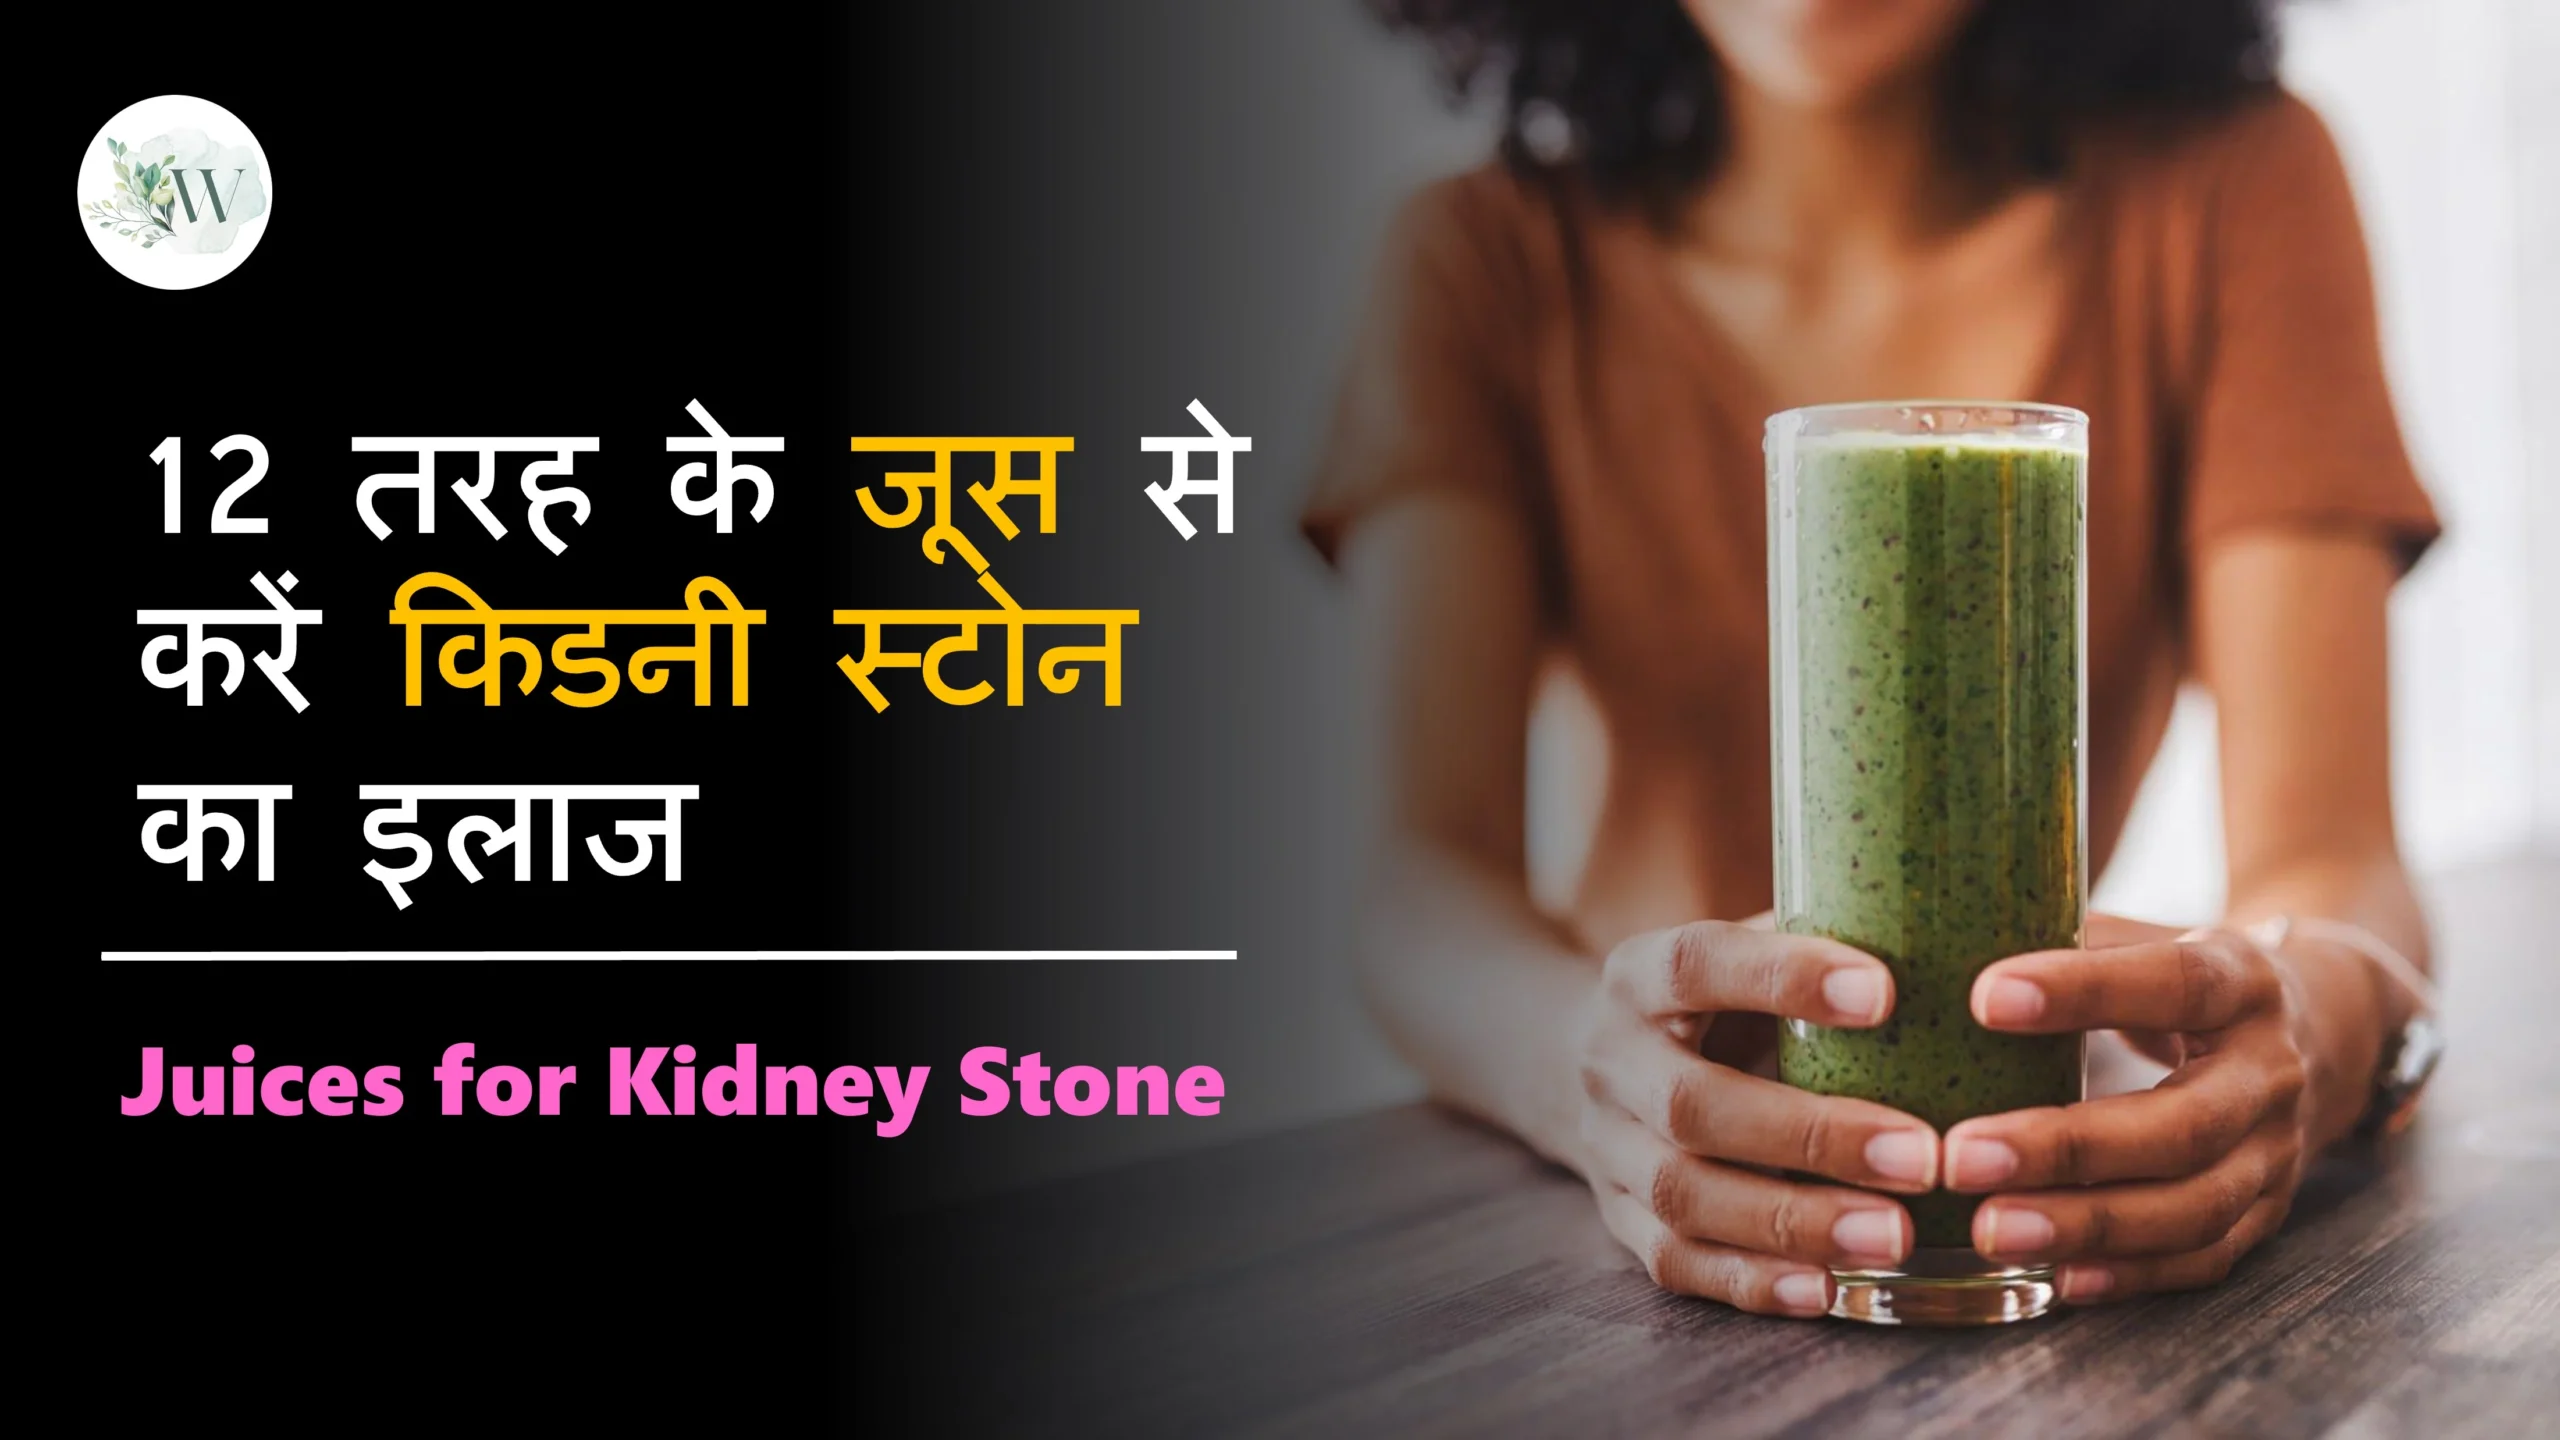 Juices for Kidney Stone Treatment in Hindi